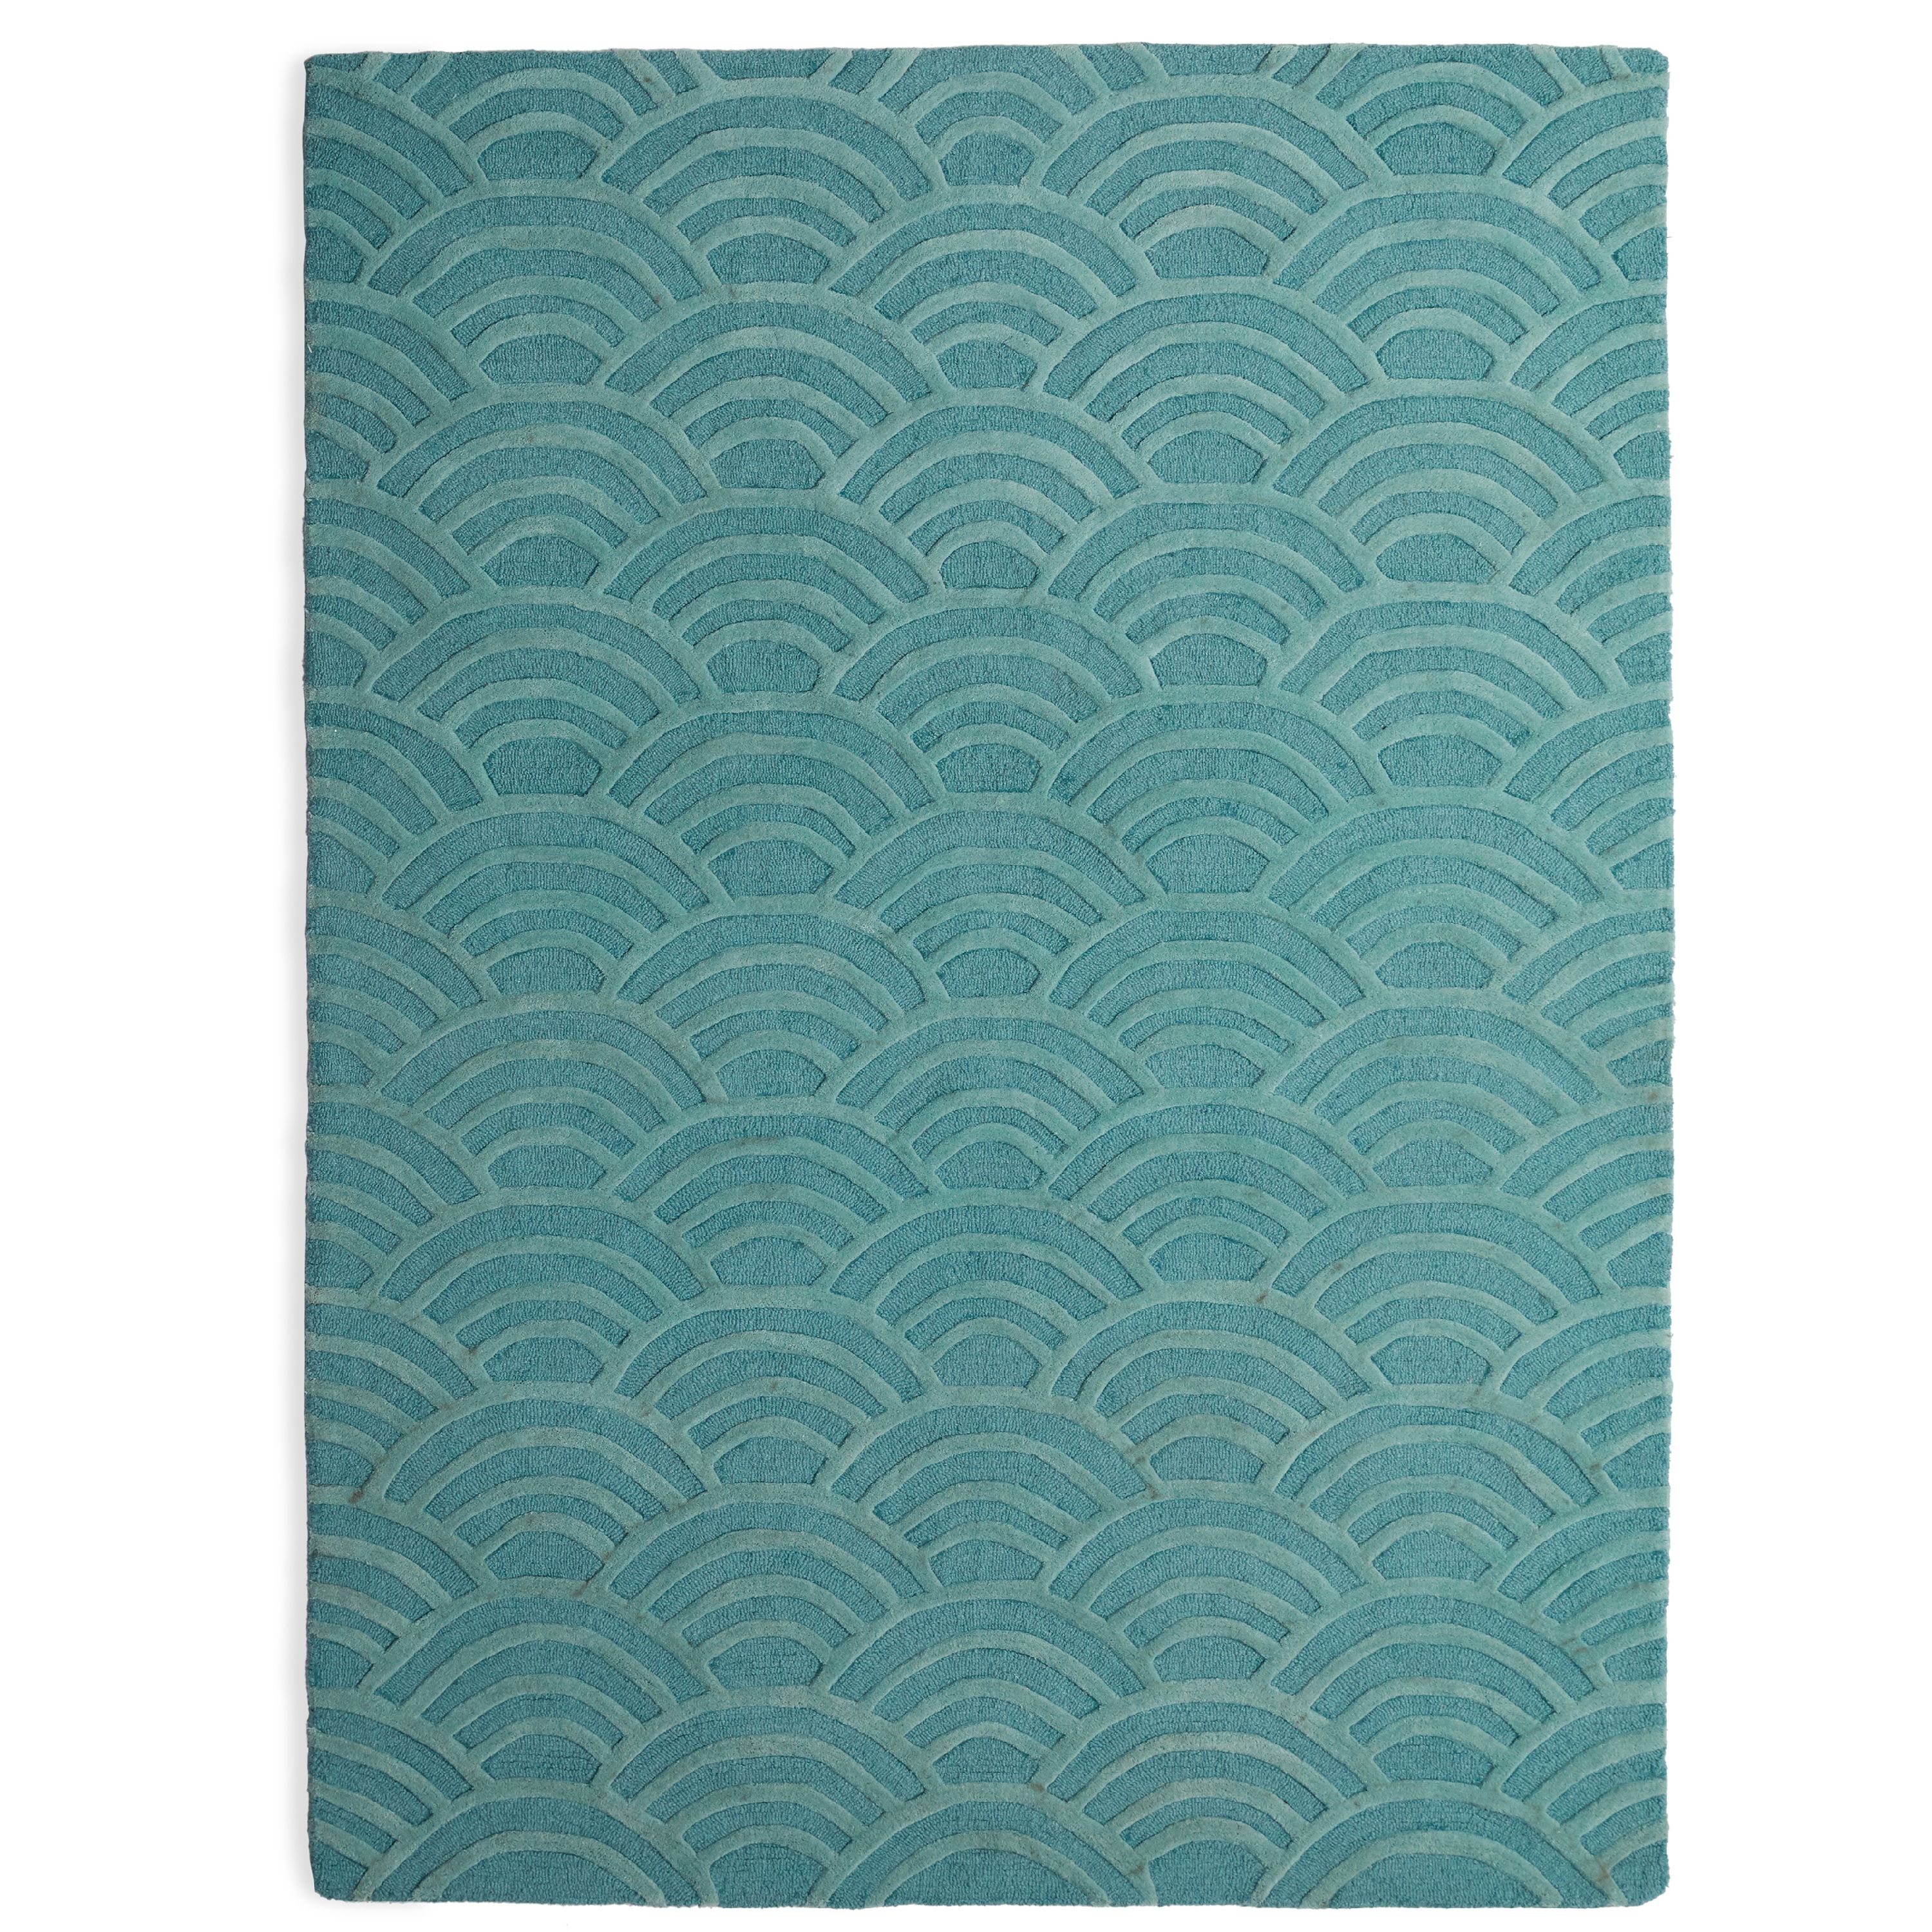 Vintage Sun Area Rug by Drew Barrymore Flower Home - image 1 of 5